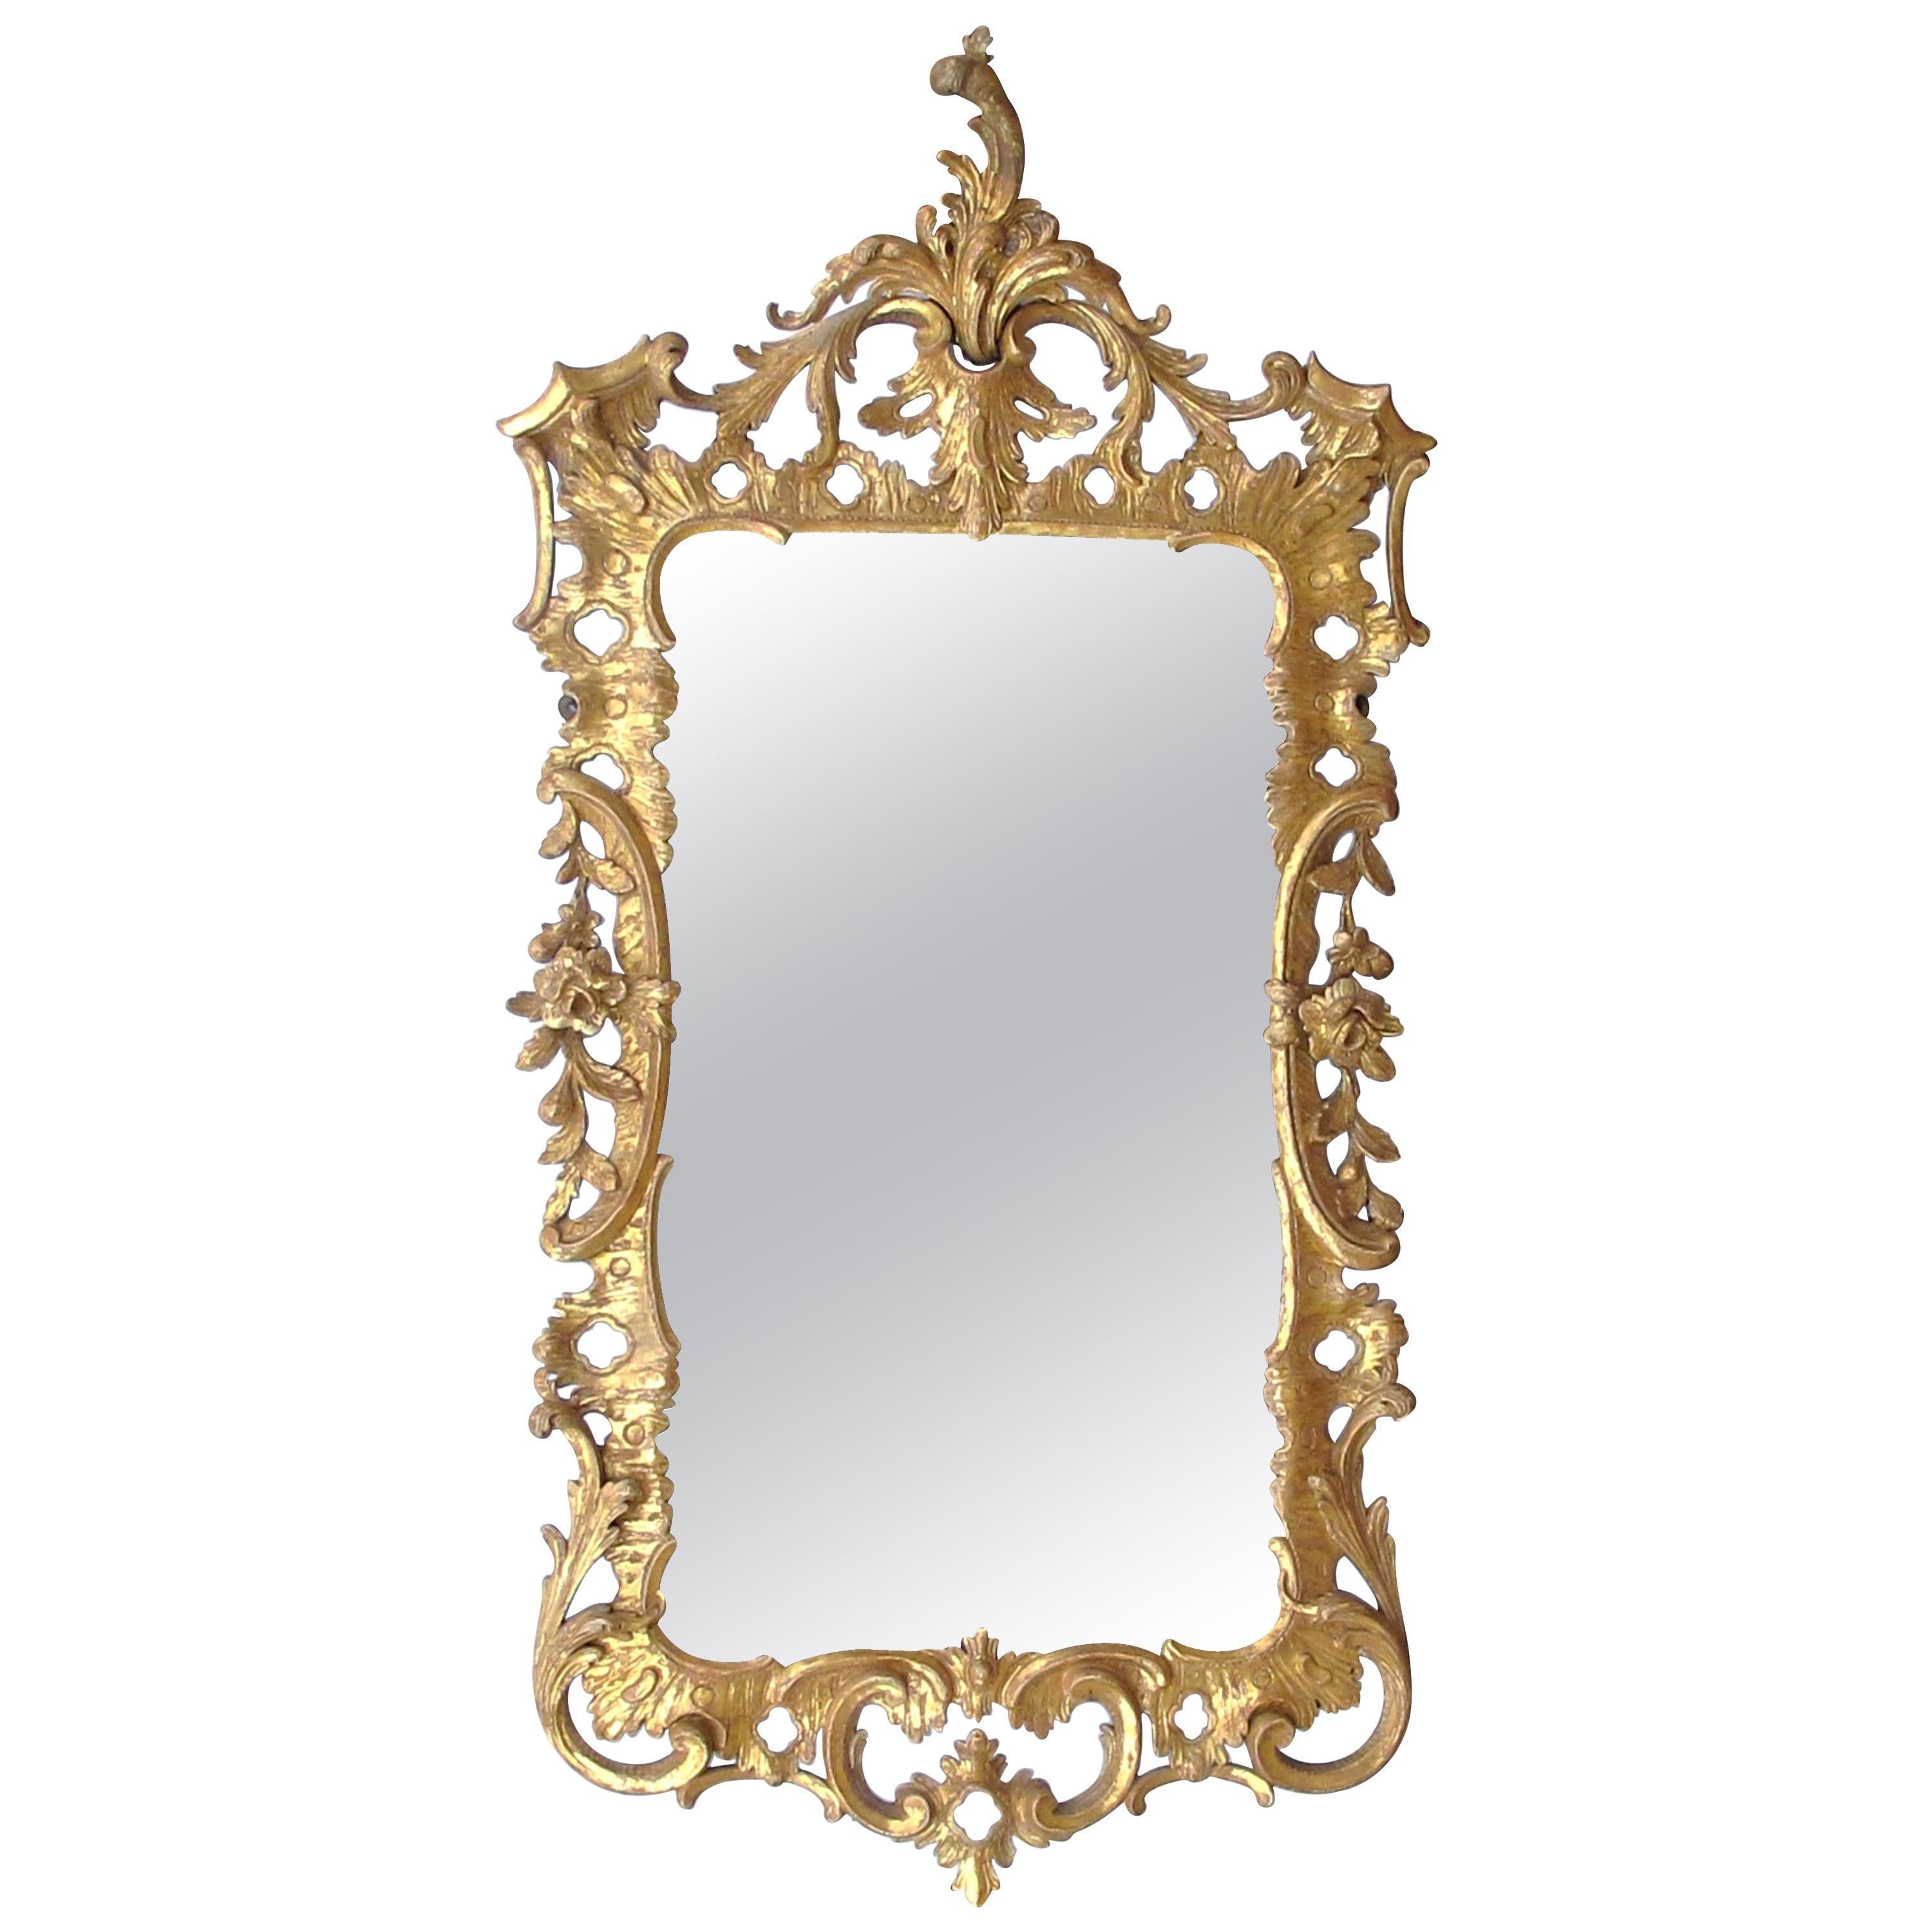 Superbly-Carved English George II Giltwood Mirror with Elaborate Foliate Crest